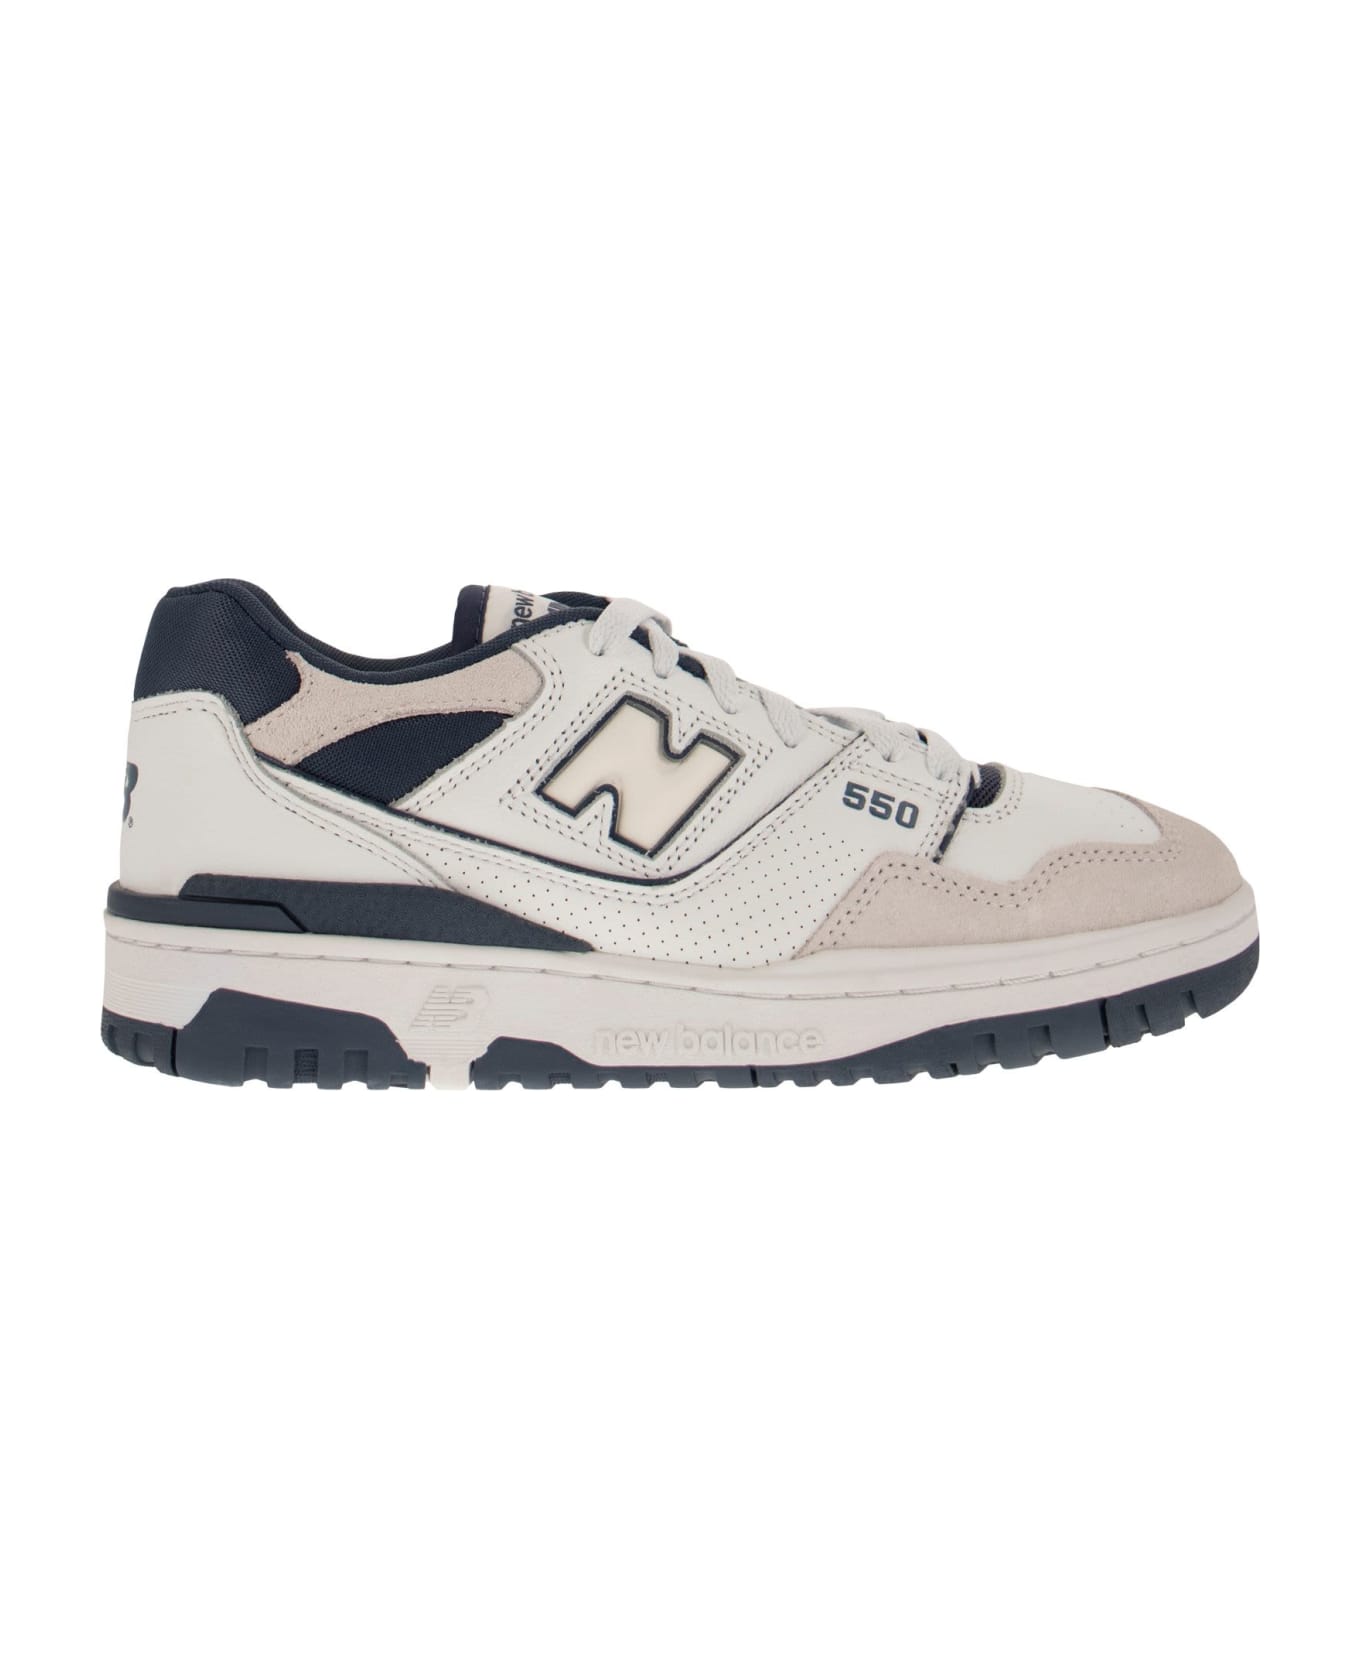 New Balance Bb550 - Sneakers - White/blue